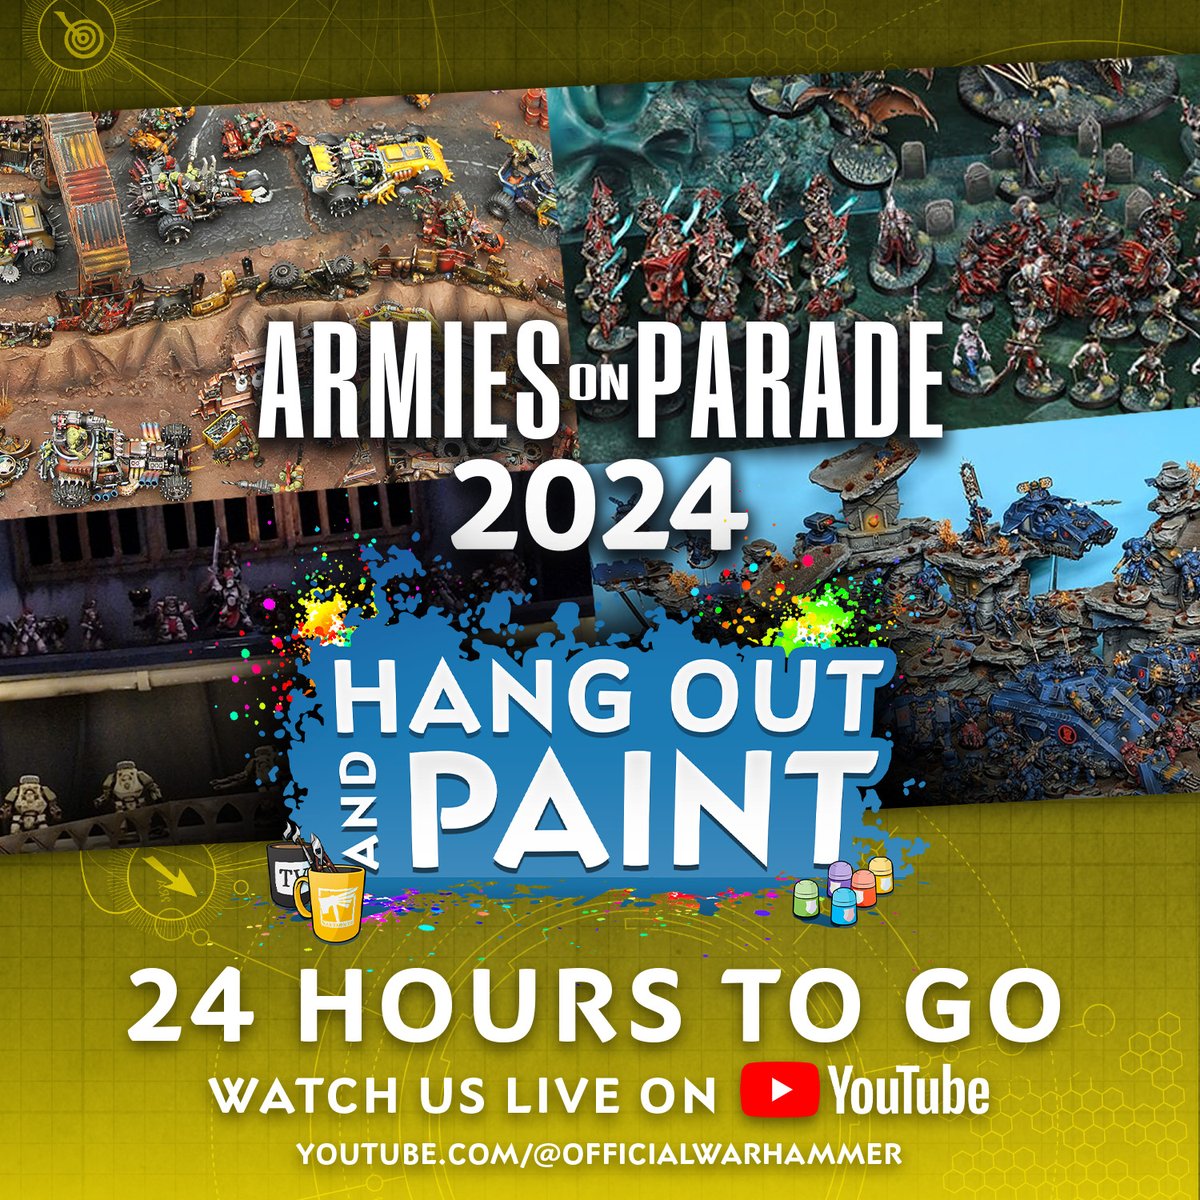 Join us to Hang Out and Paint tomorrow! Share your Armies on Parade progress for a chance to feature on the show. ow.ly/K4wB50Rf9qC #WarhammerCommunity